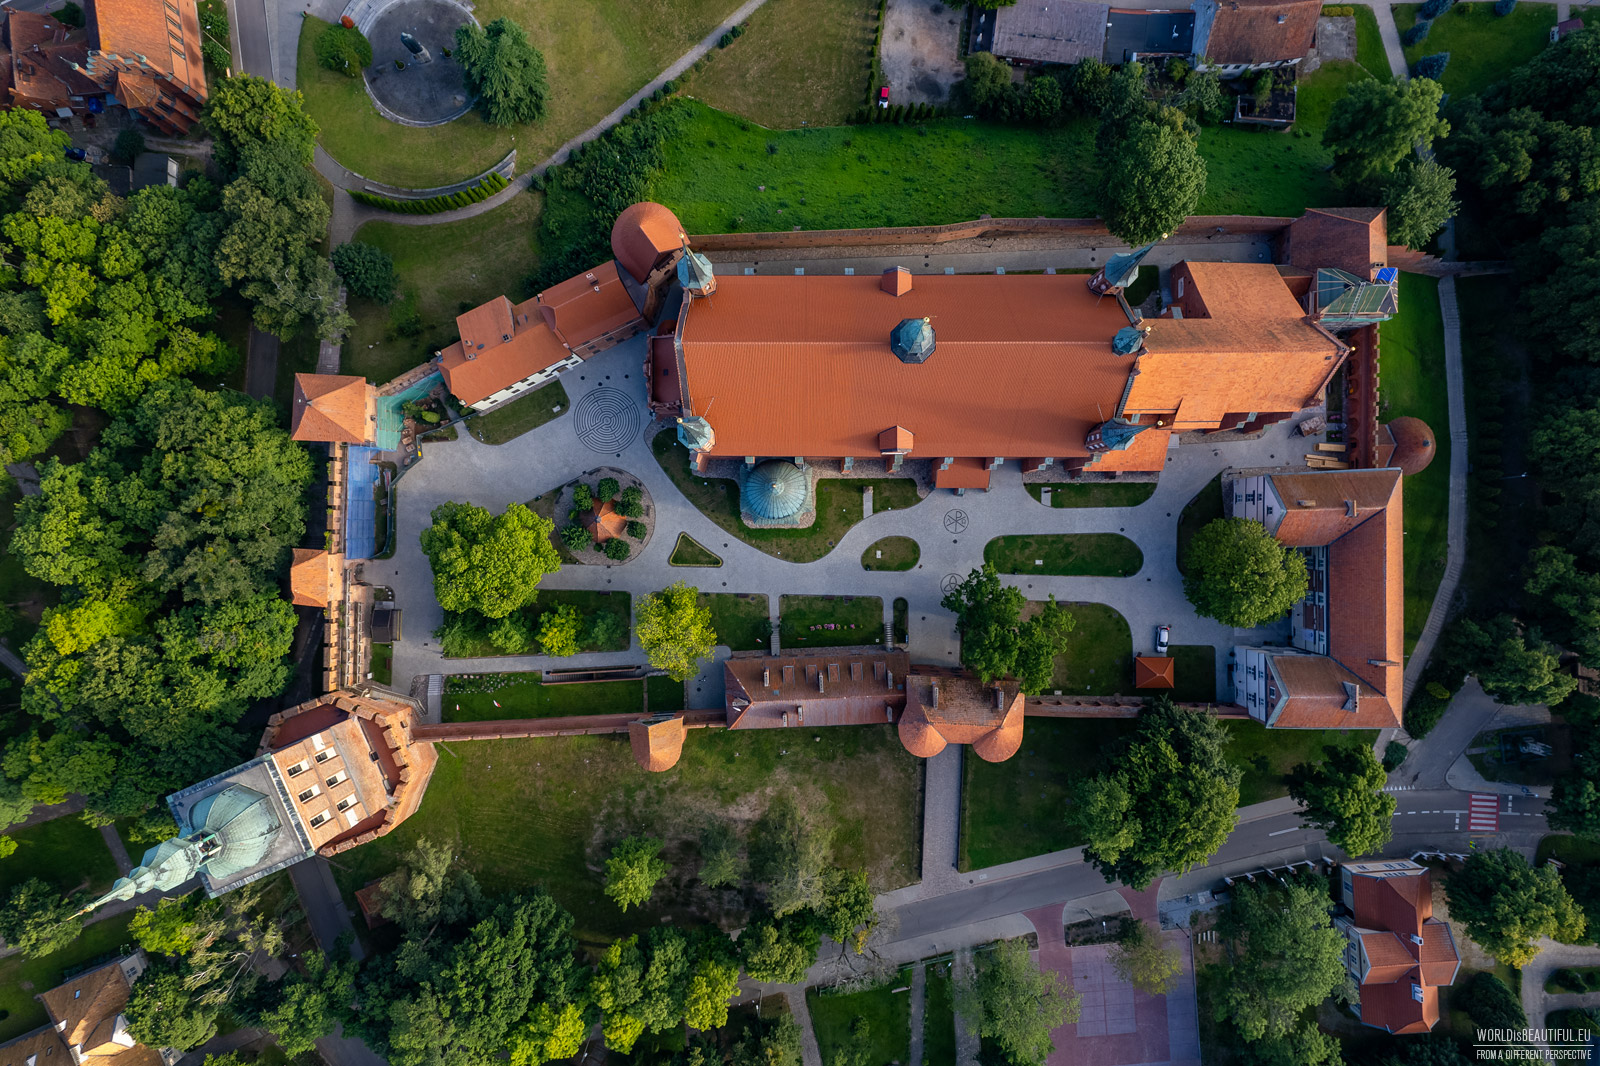 Top view of the Frombork castle